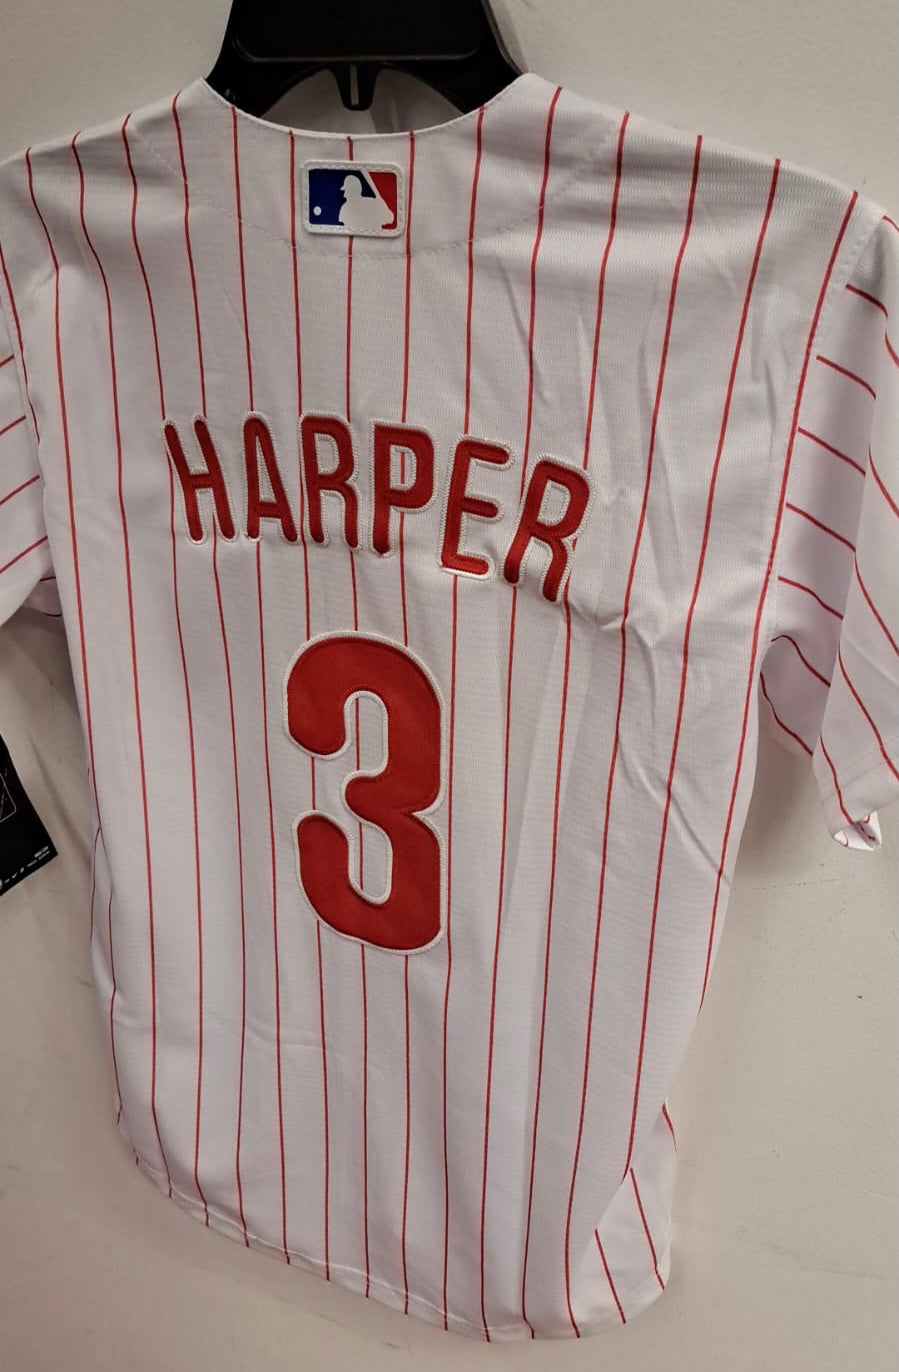 bryce harper phillies jersey youth